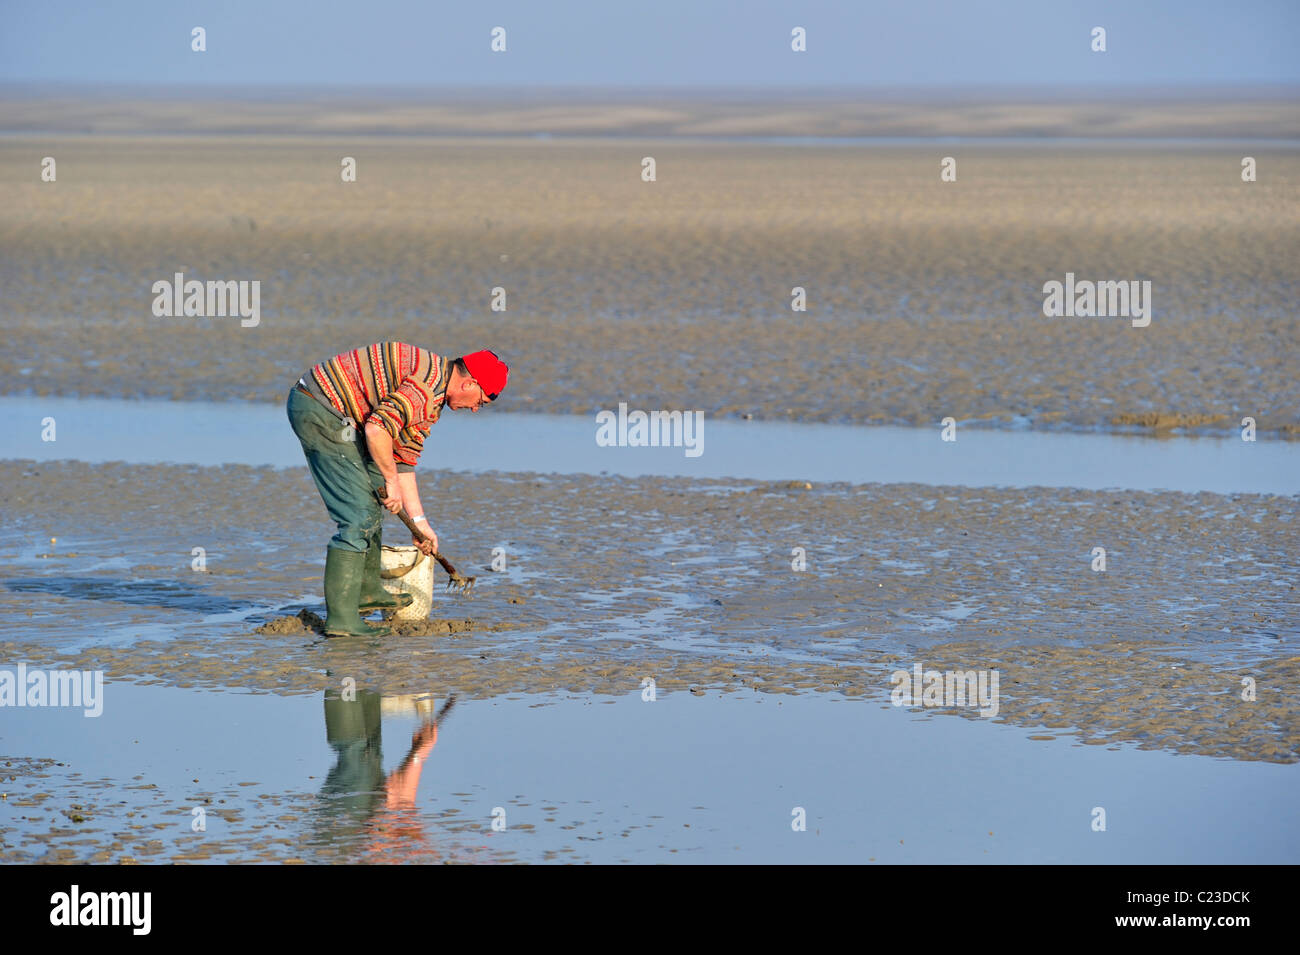 Man, equipped with clamming rake and bucket, digging for clams in the tidal mud flats of the Bay of the Somme, Picardy, France Stock Photo